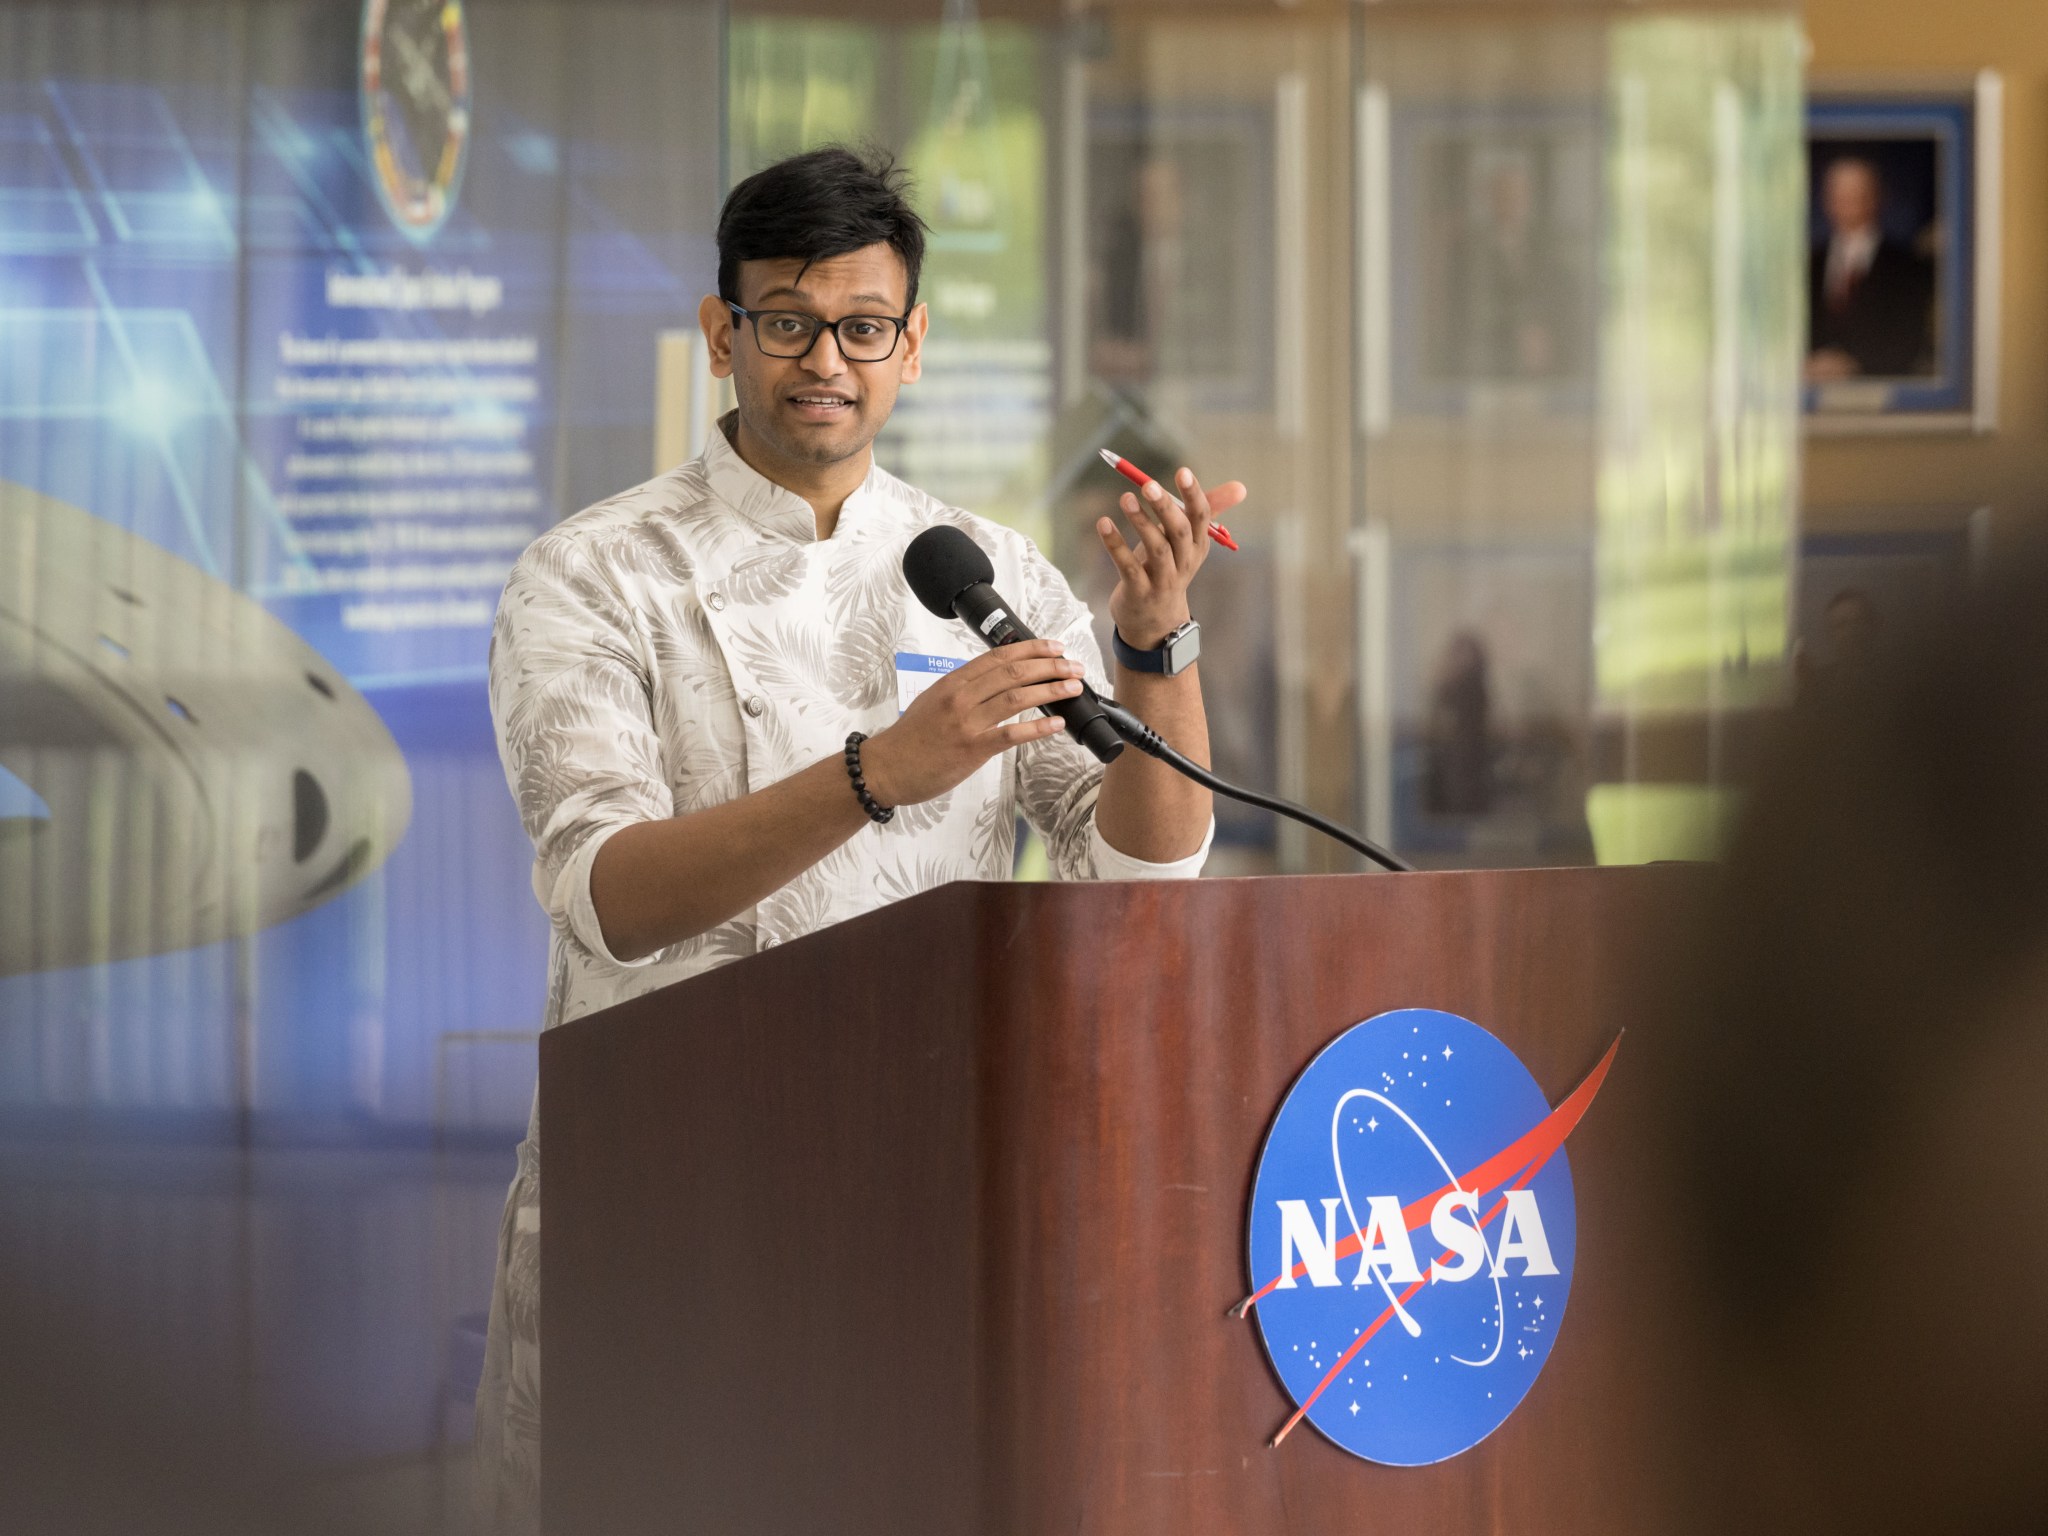 An Indian man wearing glasses and traditional attire speaks at a podium with the NASA meatball on the front.